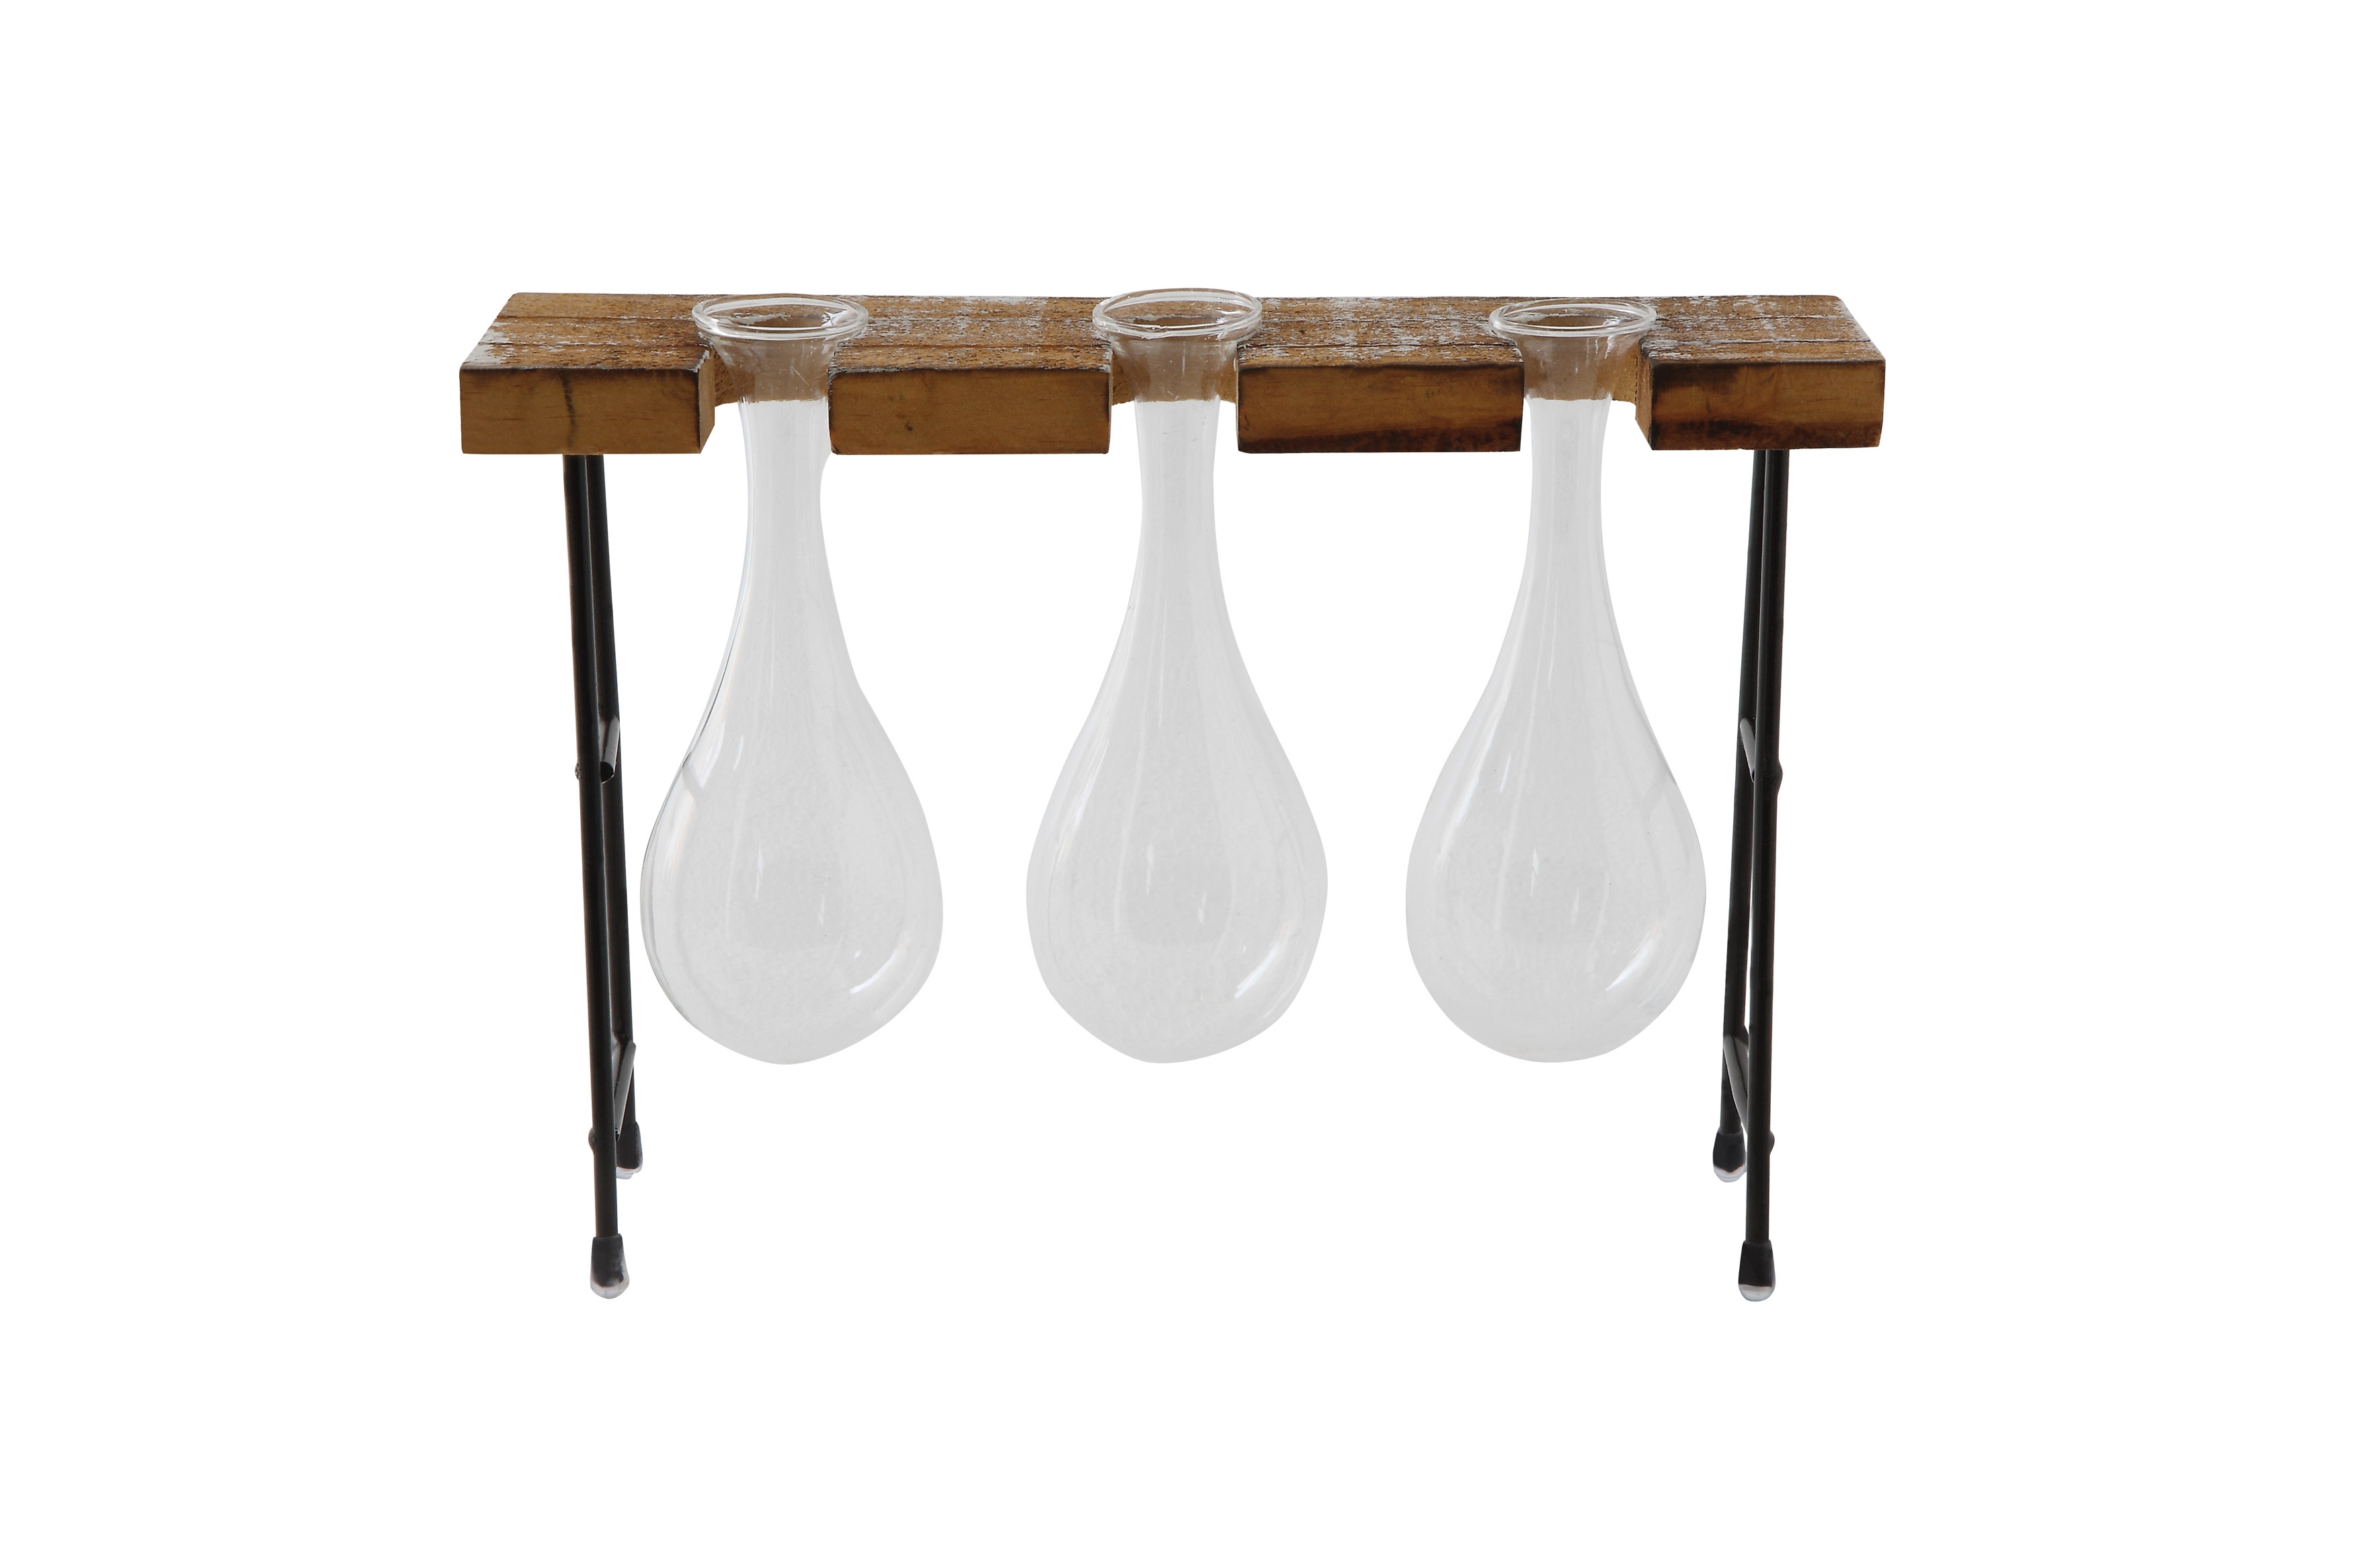 Glass Vases with Wood & Metal Stand (Set of 4 Pieces) - Image 0